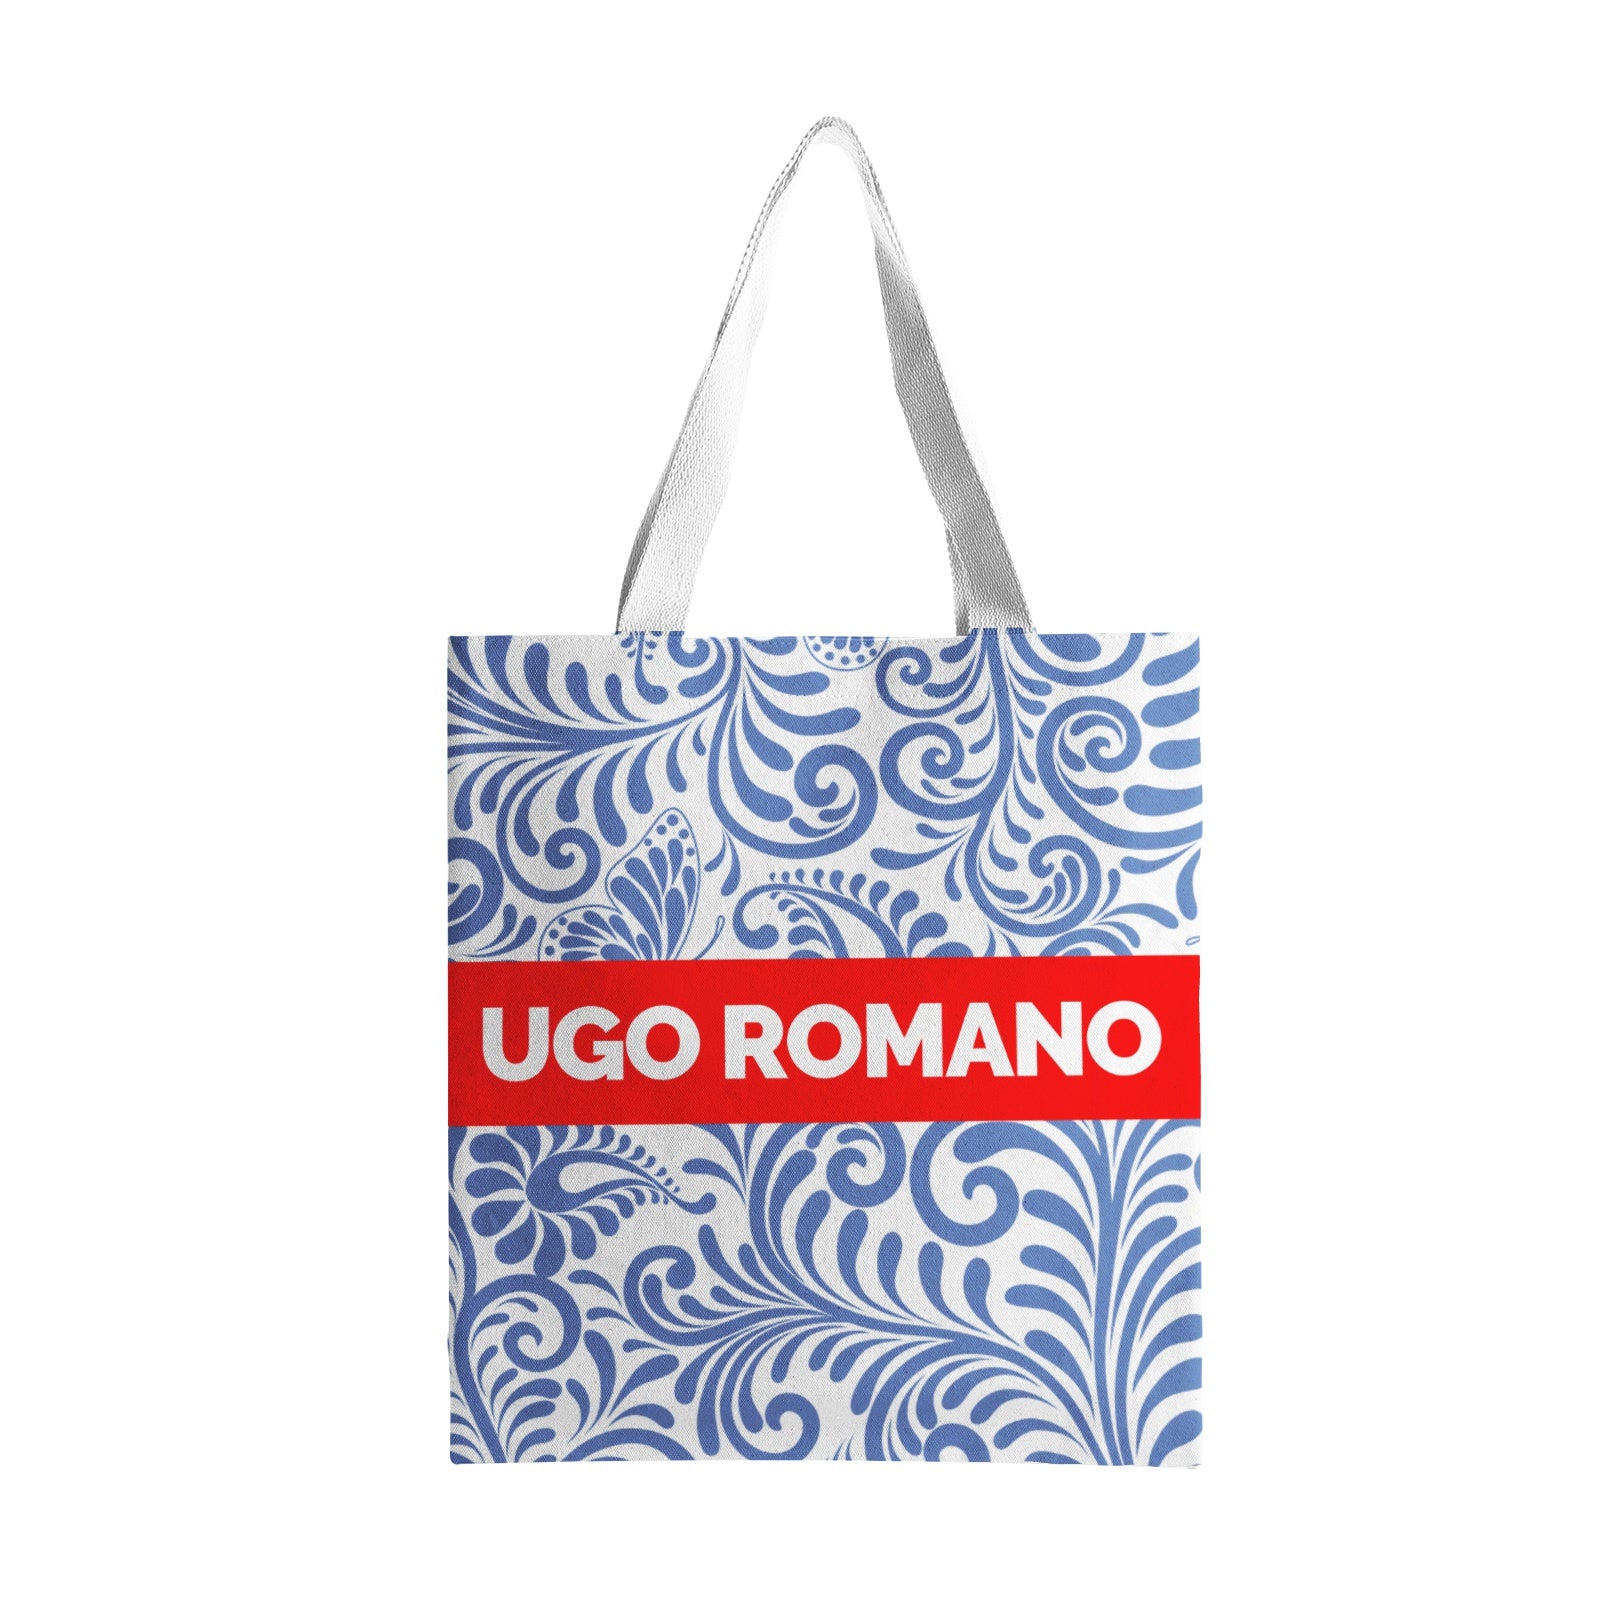 Heavy Duty and Strong Natural Cotton Canvas Tote Bag - UGO ROMANO URTB032